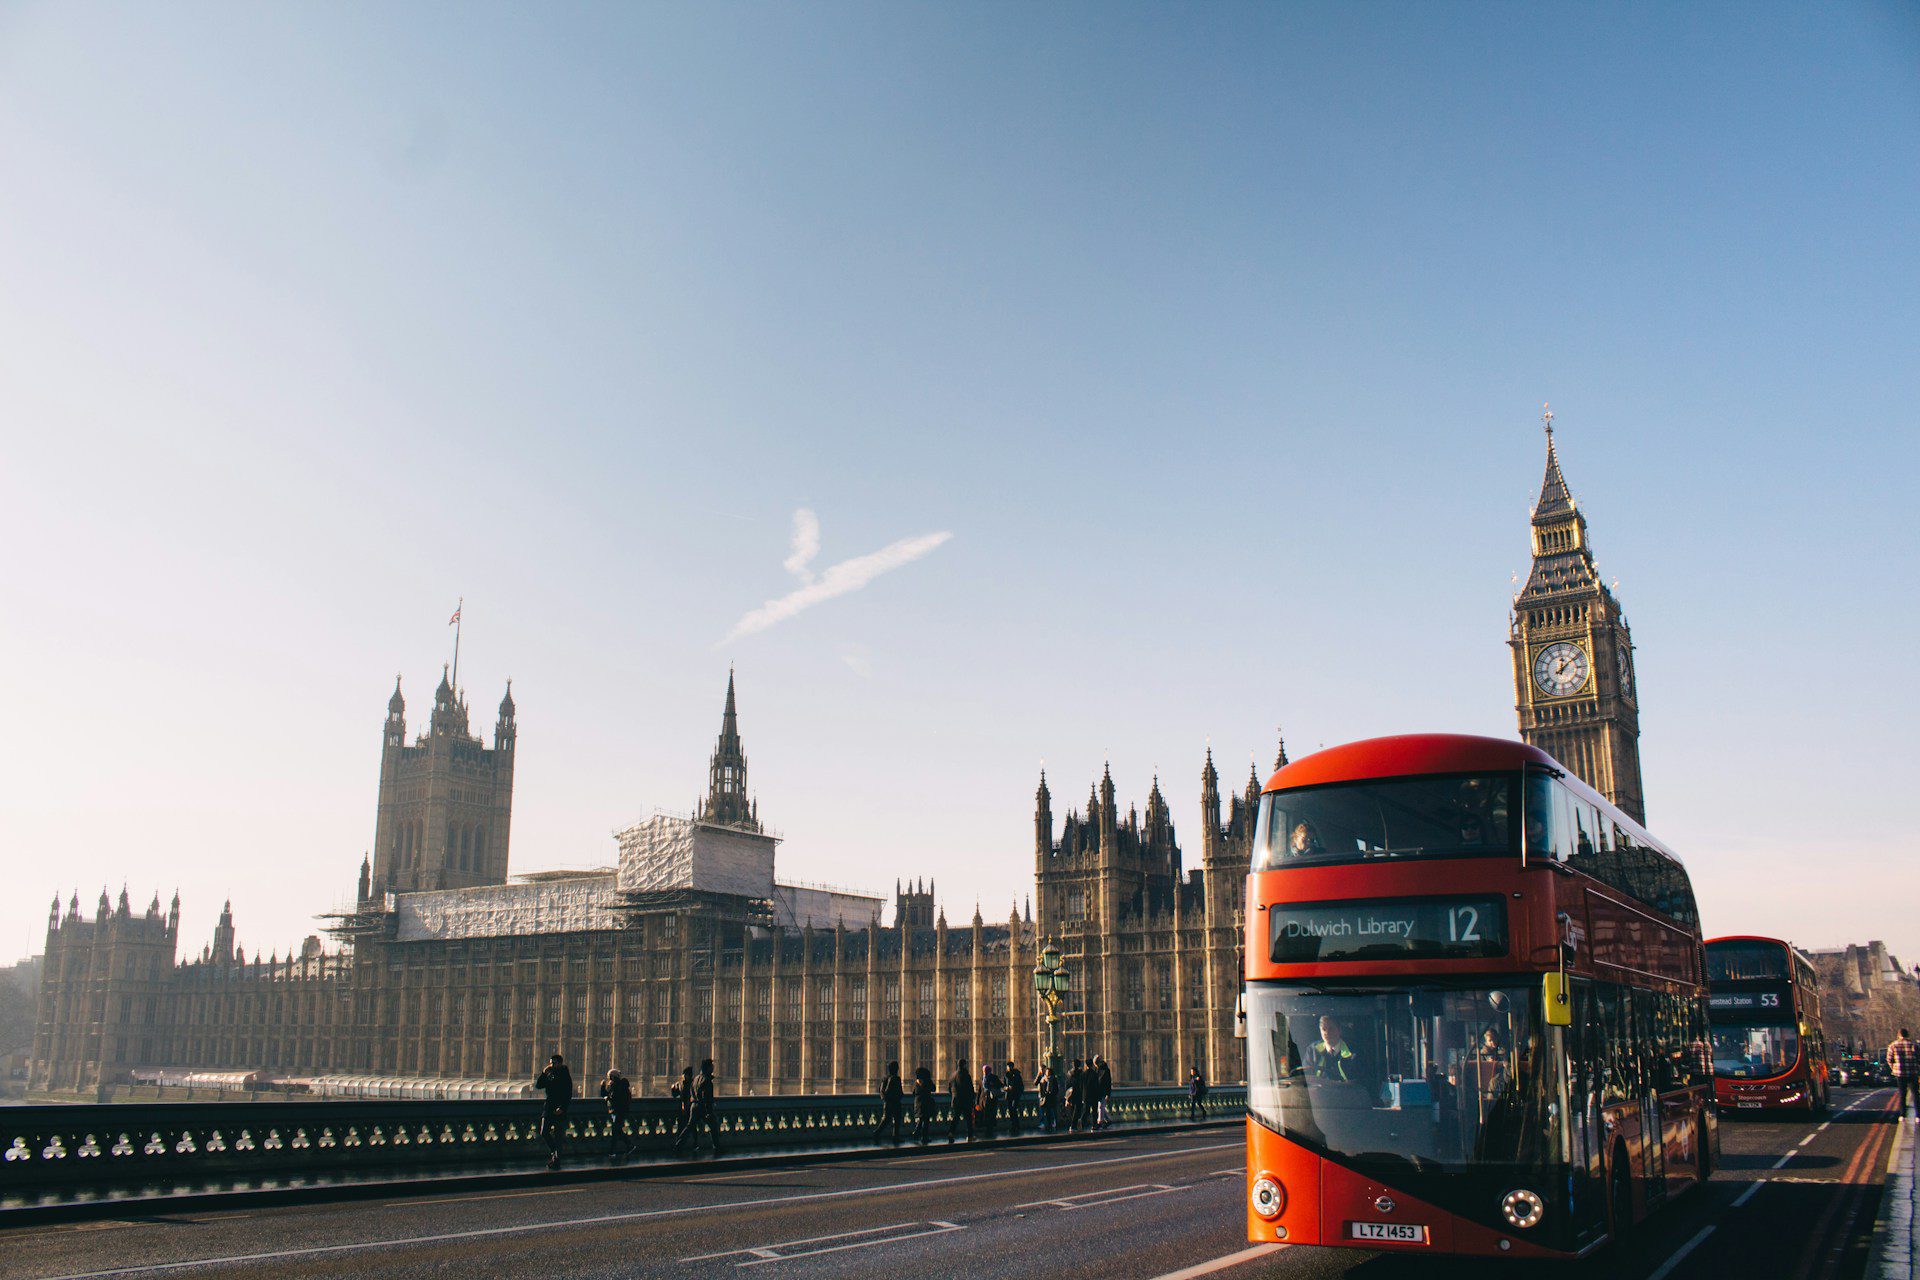 View of the houses of parliament and Big Ben from the street, with a red double-decker bus driving past, and blue skies above.